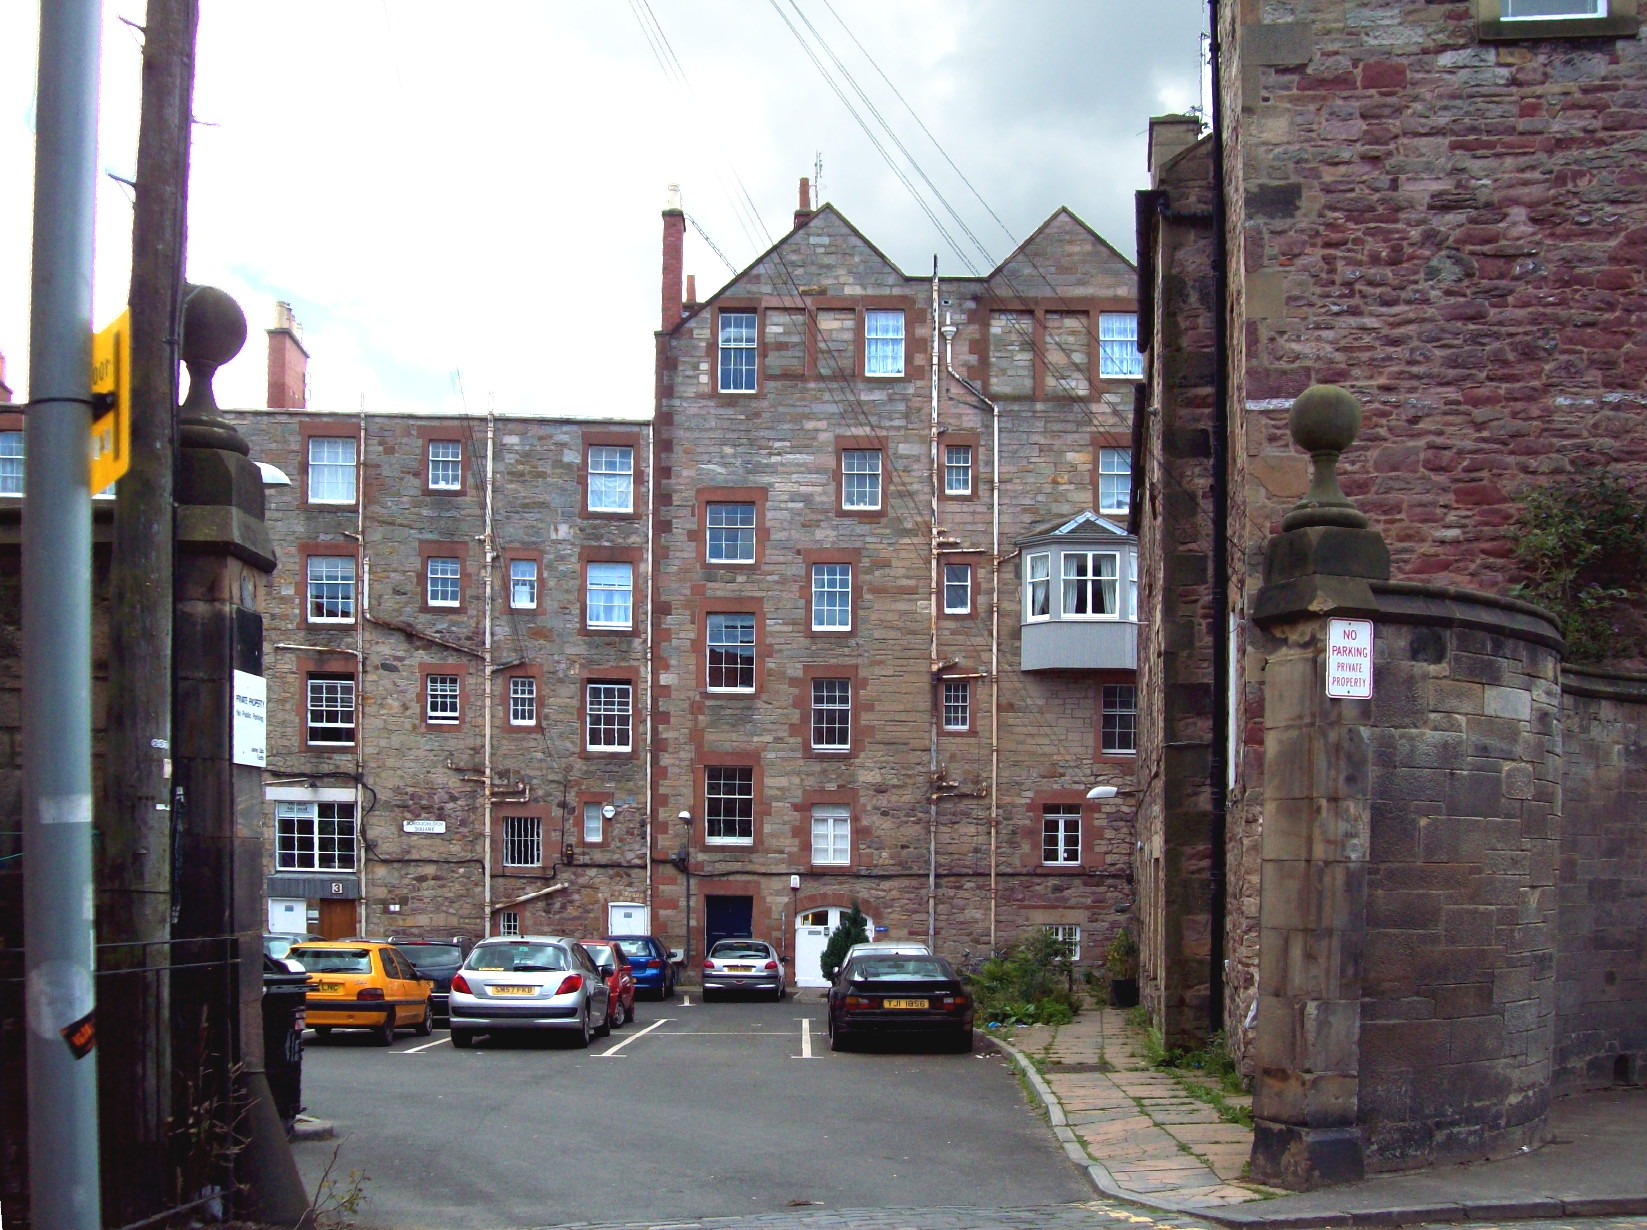 view between stone pillars into a courtyyard lined with multi-storey buildings made of a gingerish stone, with red sandstone rims round the windows